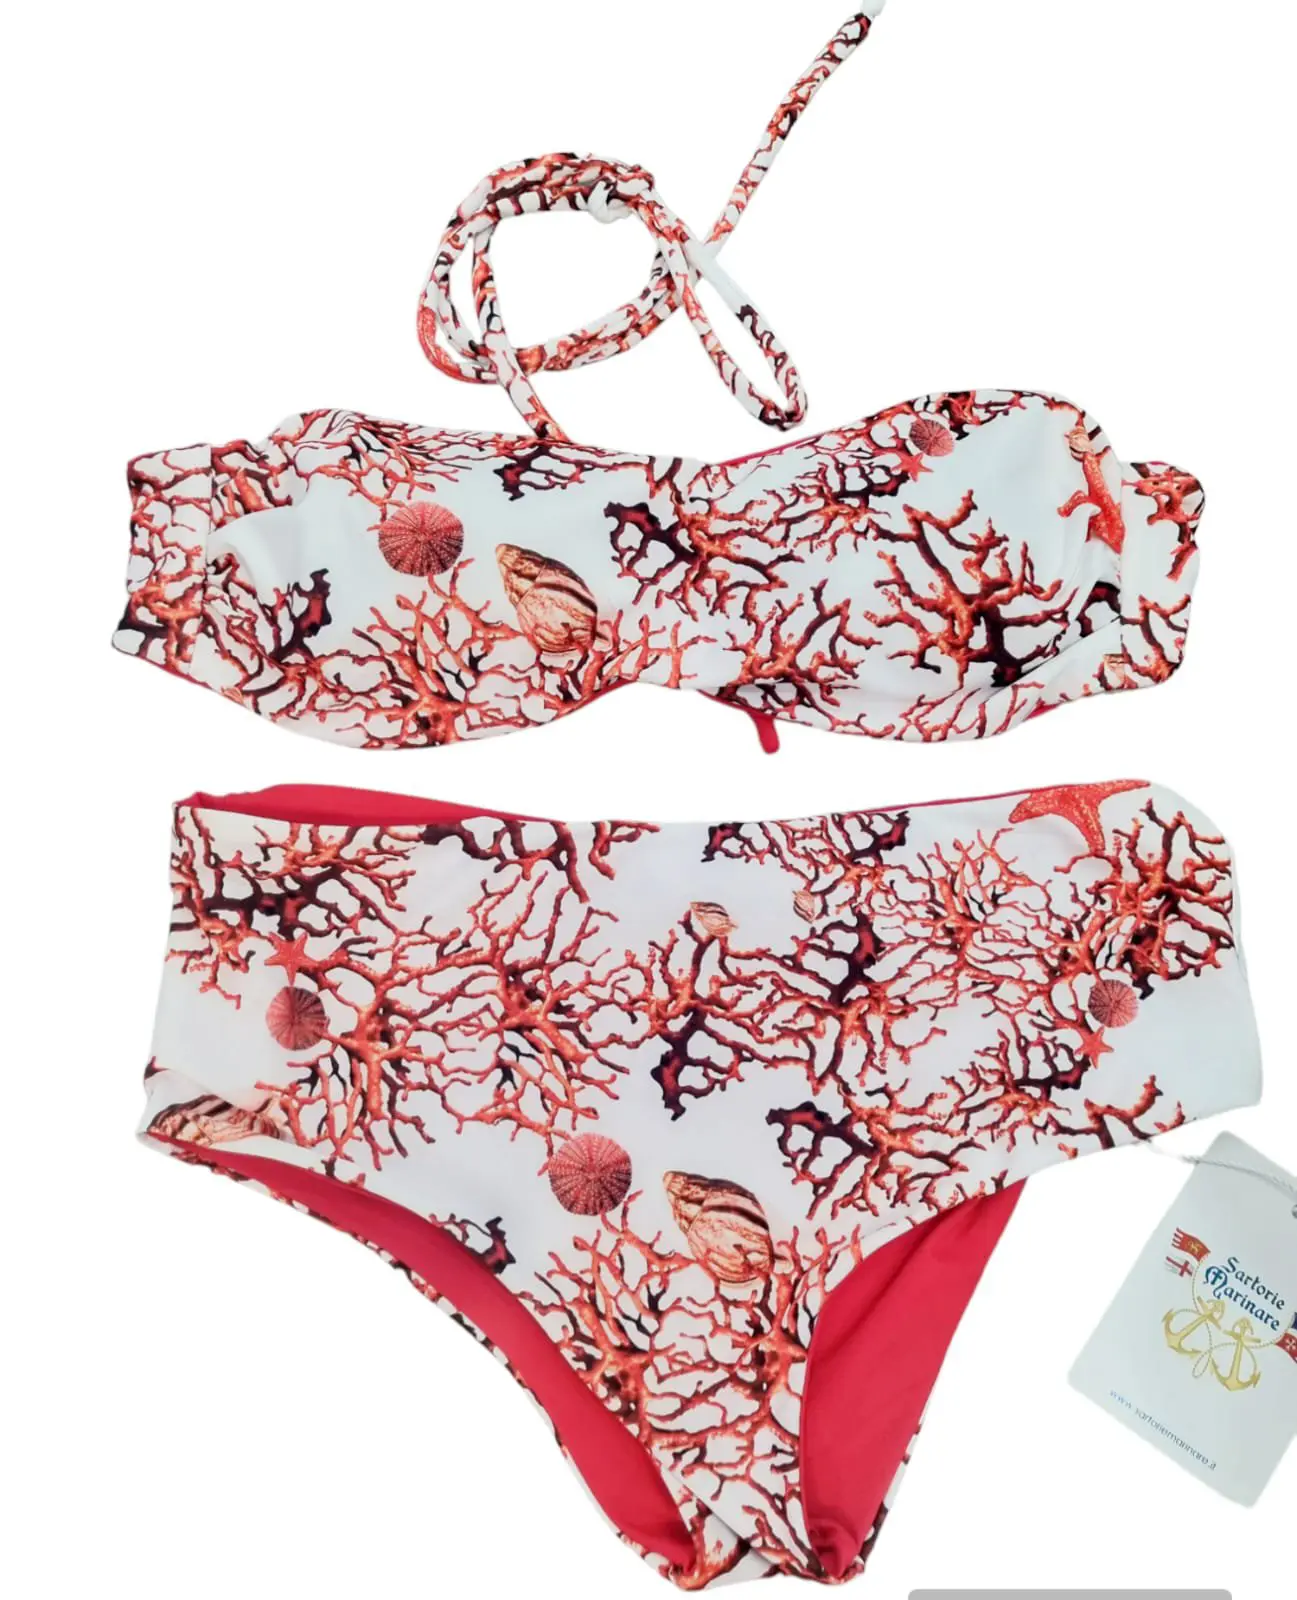 Double-sided bandeau bikini with the possibility of inserting laces, culotte briefs. Coral and red pattern. Size S